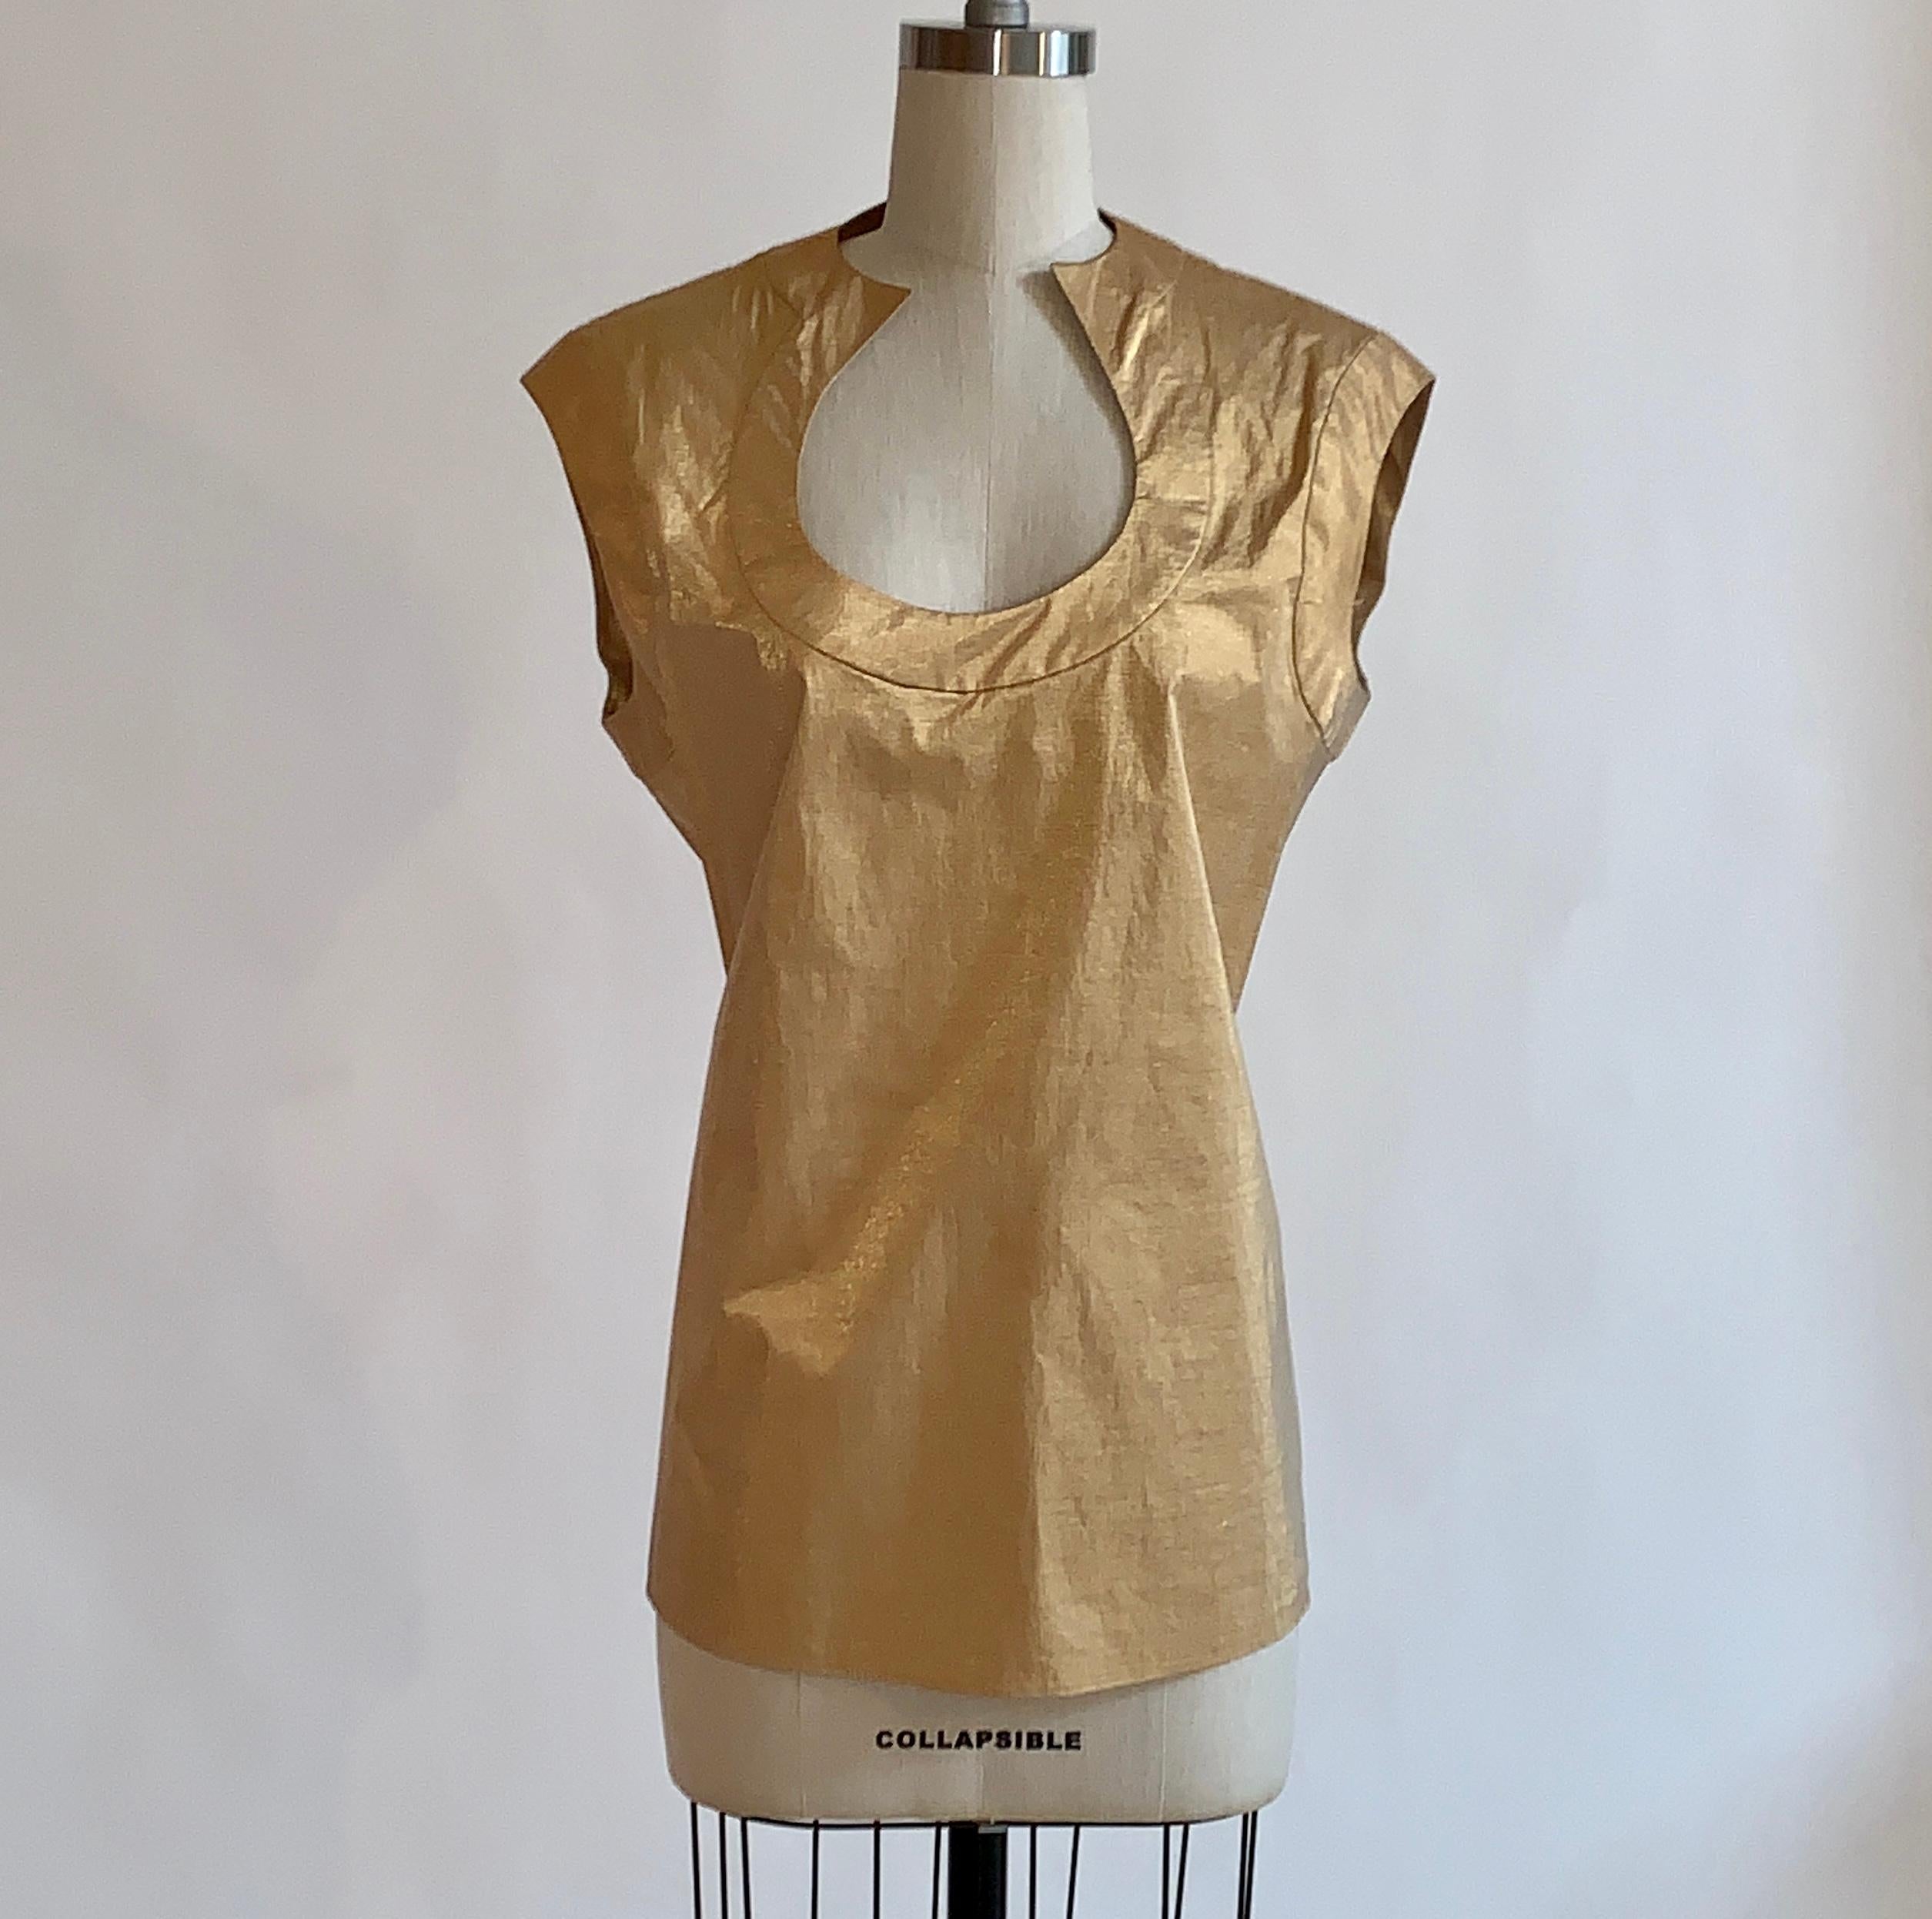 Alexander McQueen metallic gold sleeveless top with a horseshoe shaped neckline. Pulls on.

Content not listed, feels like a blend. 

Made in Italy.

IT 46, approximate US 8/10. See measurements.
(Shown clipped on size 2 mannequin, will probably be